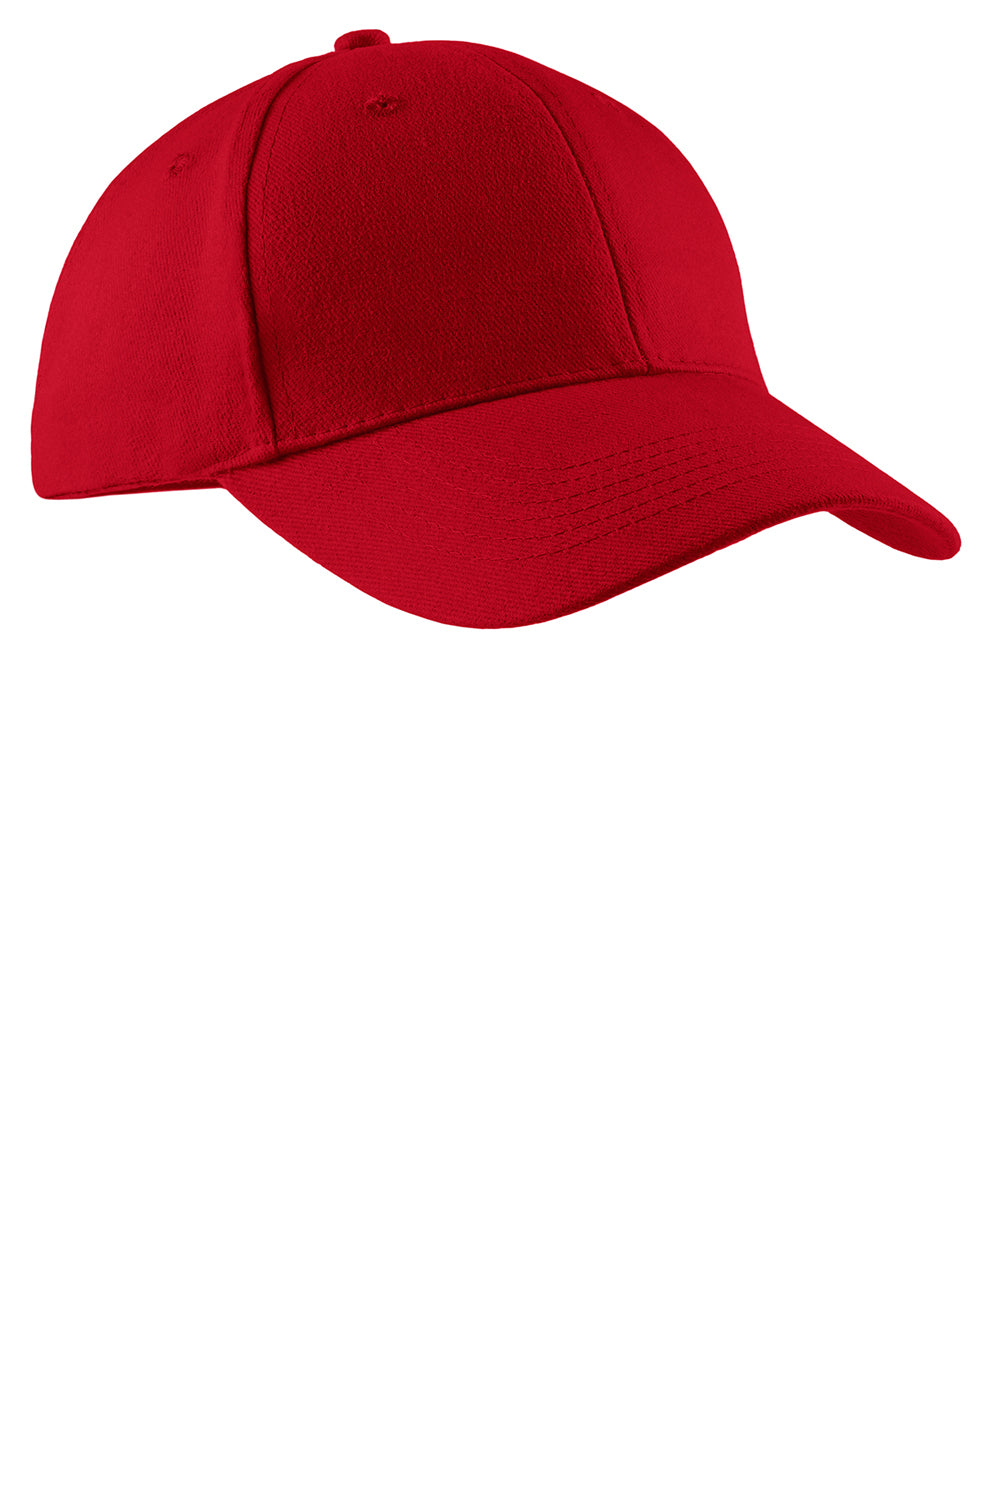 Port & Company CP82 Mens Adjustable Hat Red Front